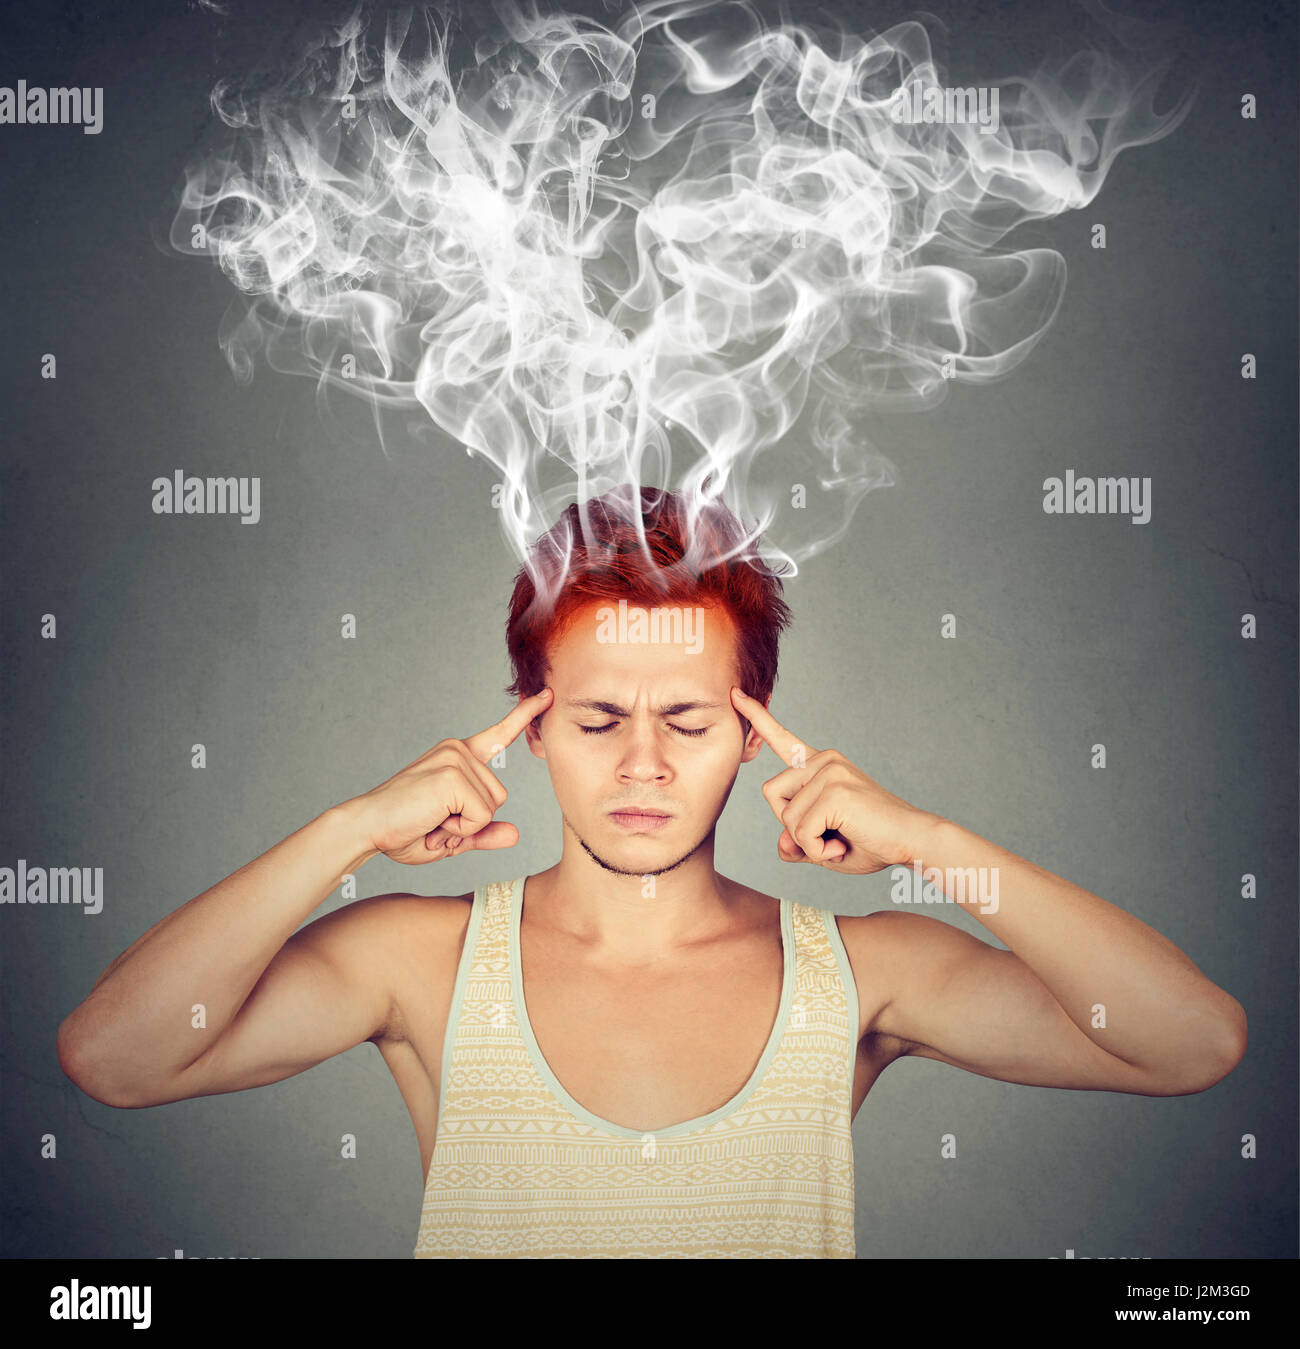 man thinks very intensely having headache isolated on gray wall background Stock Photo